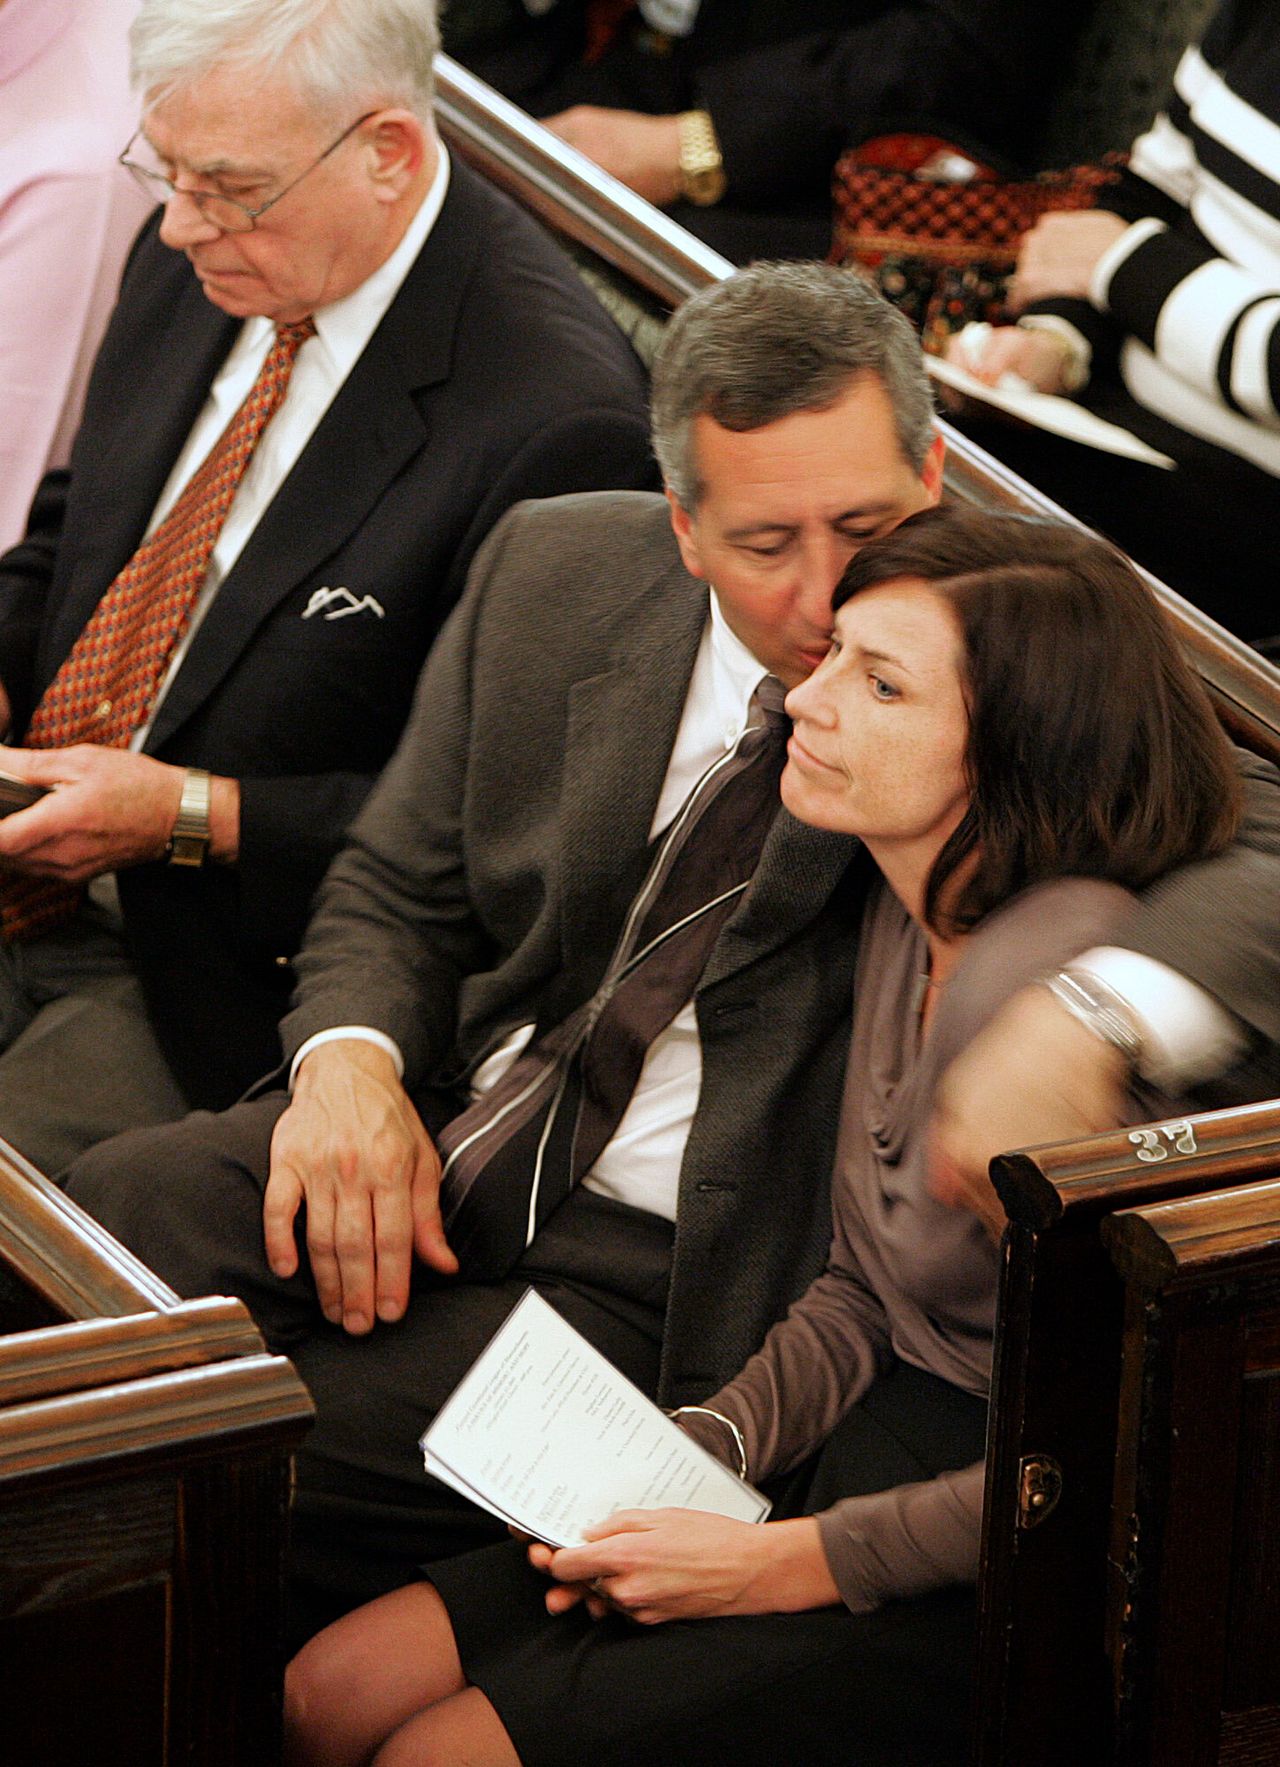 Phil Cerrone consoles Meghan Lowney after she spoke at a memorial service for her sister, Shannon Lowney, on Jan. 12, 2005, at the Arlington Street Church in Boston. The service was held in memory of Shannon Lowney and Lee Ann Nichols, who were killed by John Salvi in abortion clinic shootings in Brookline, Massachusetts, 10 years earlier. 